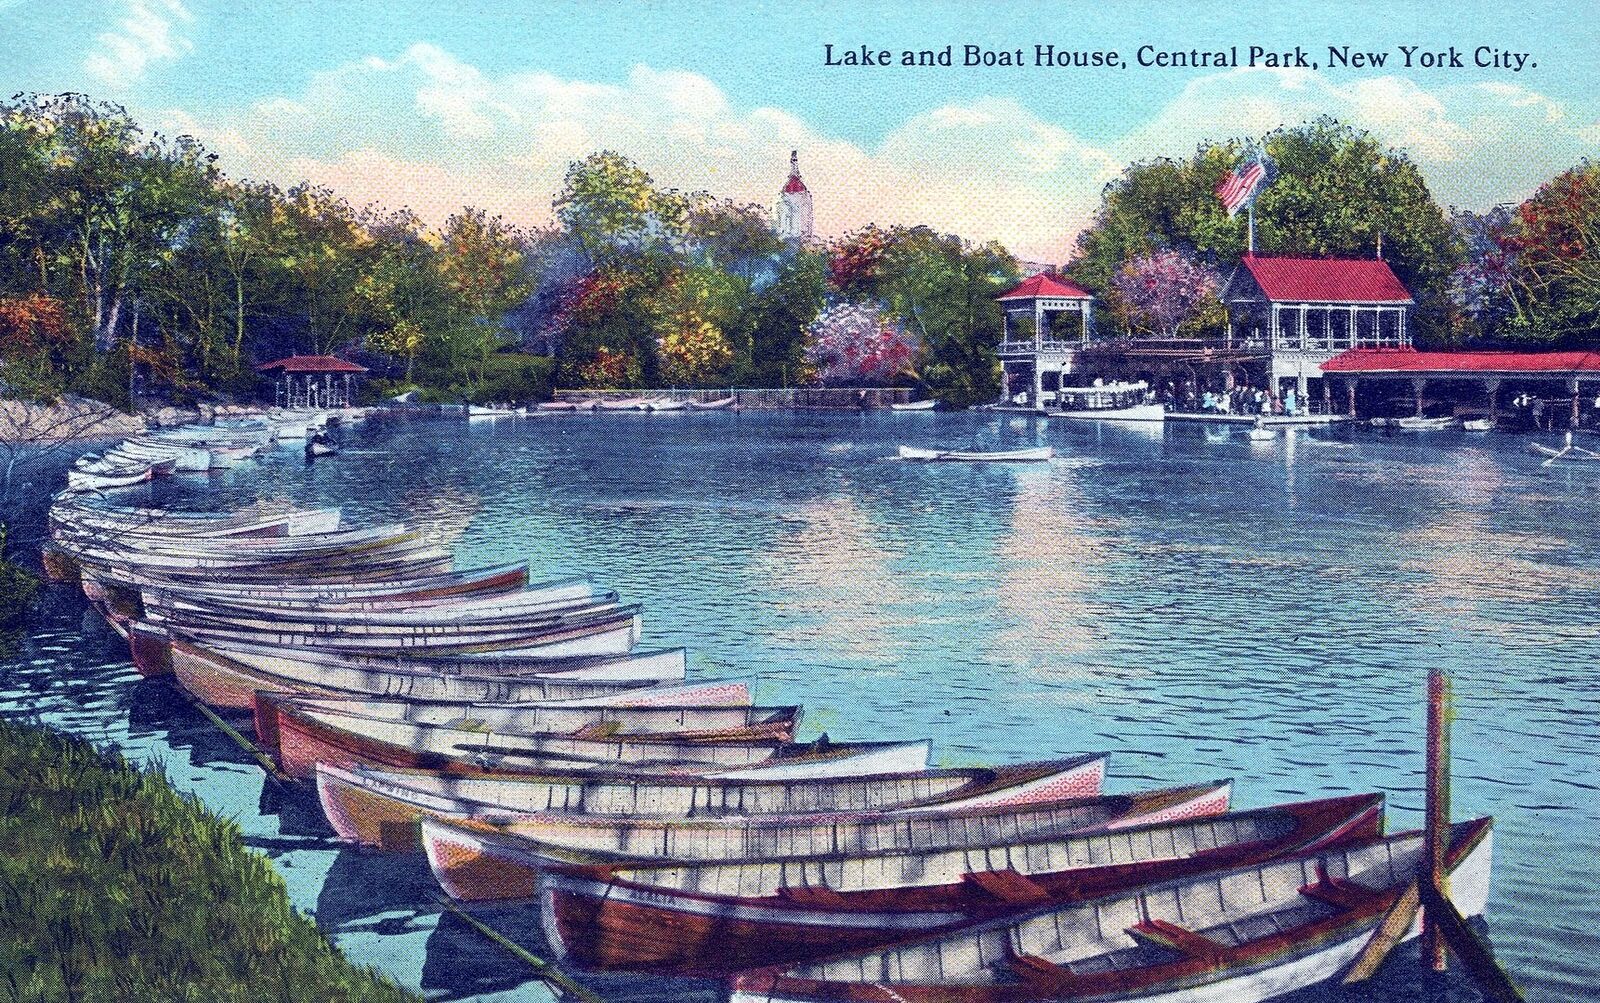 NEW YORK CITY - Central Park Lake And Boat House Postcard